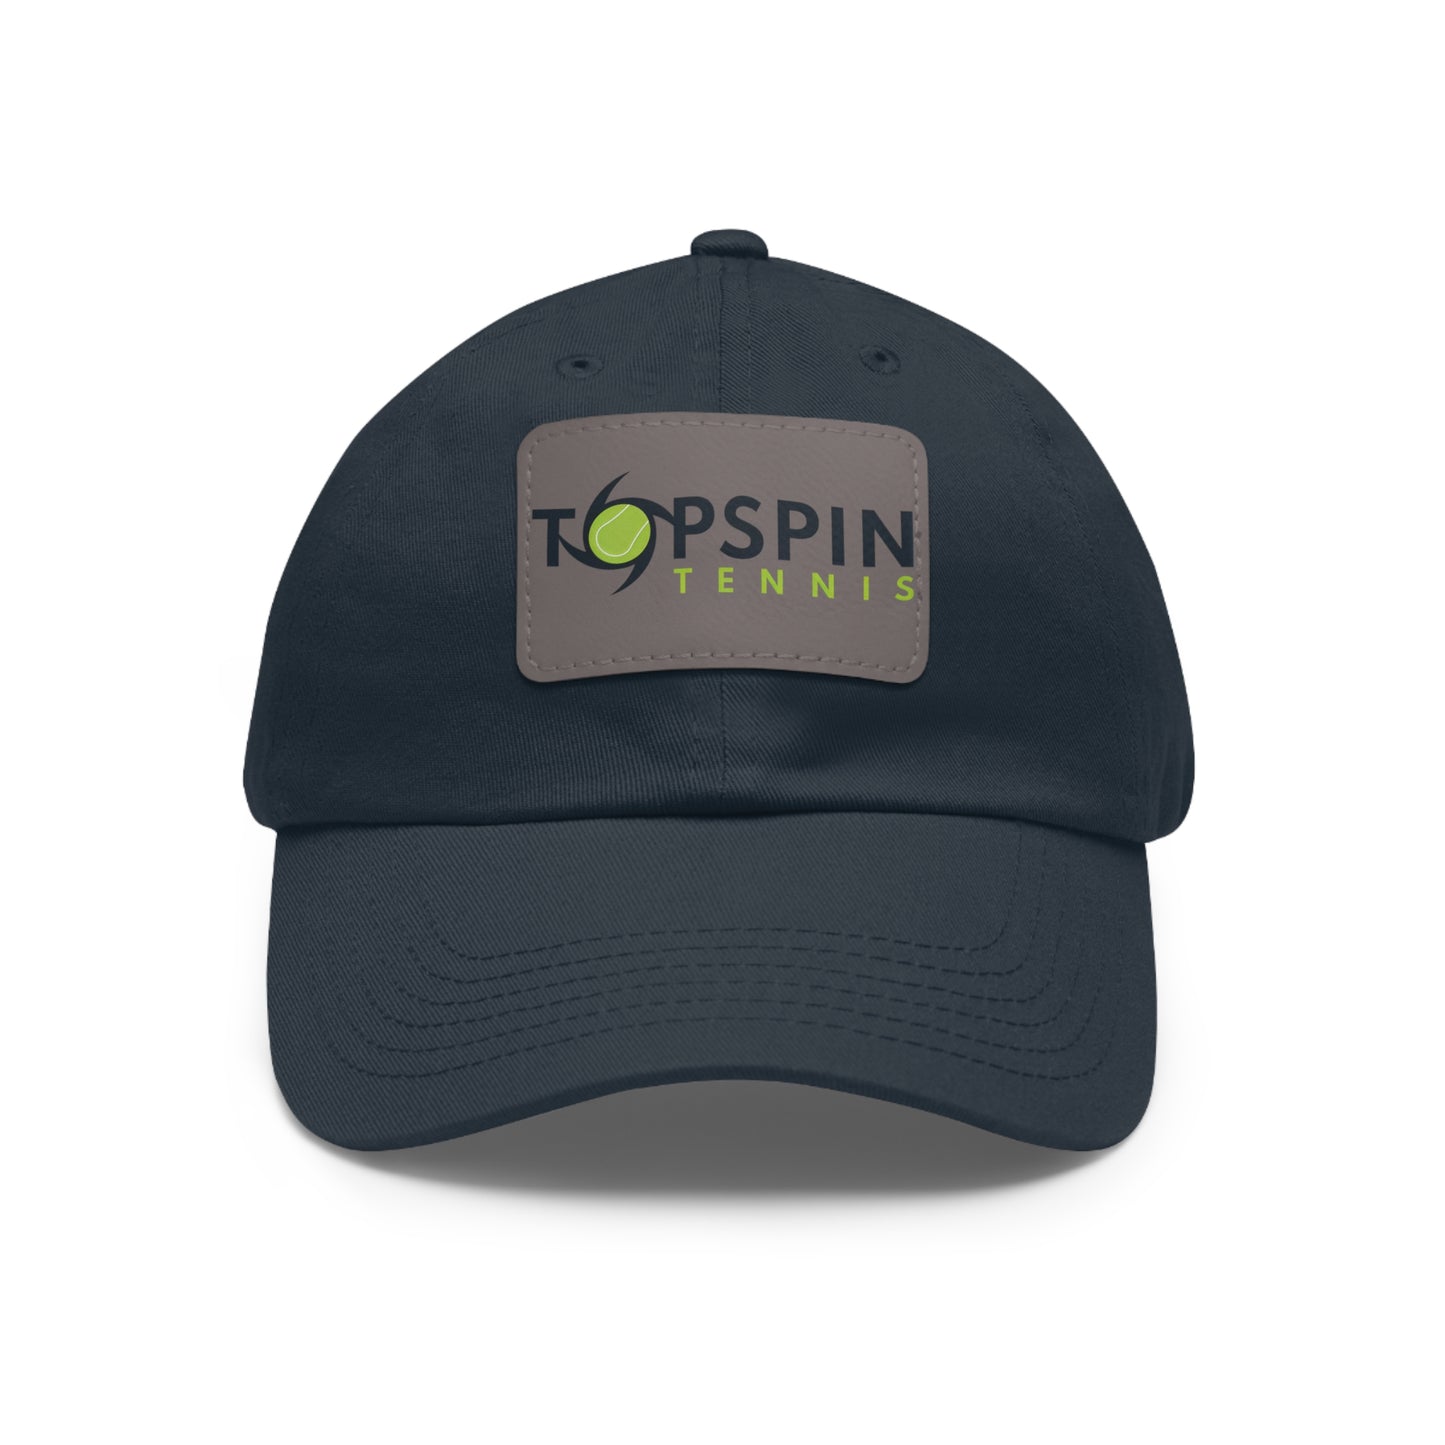 Topspin Tennis Baseball Cap with Leather Patch